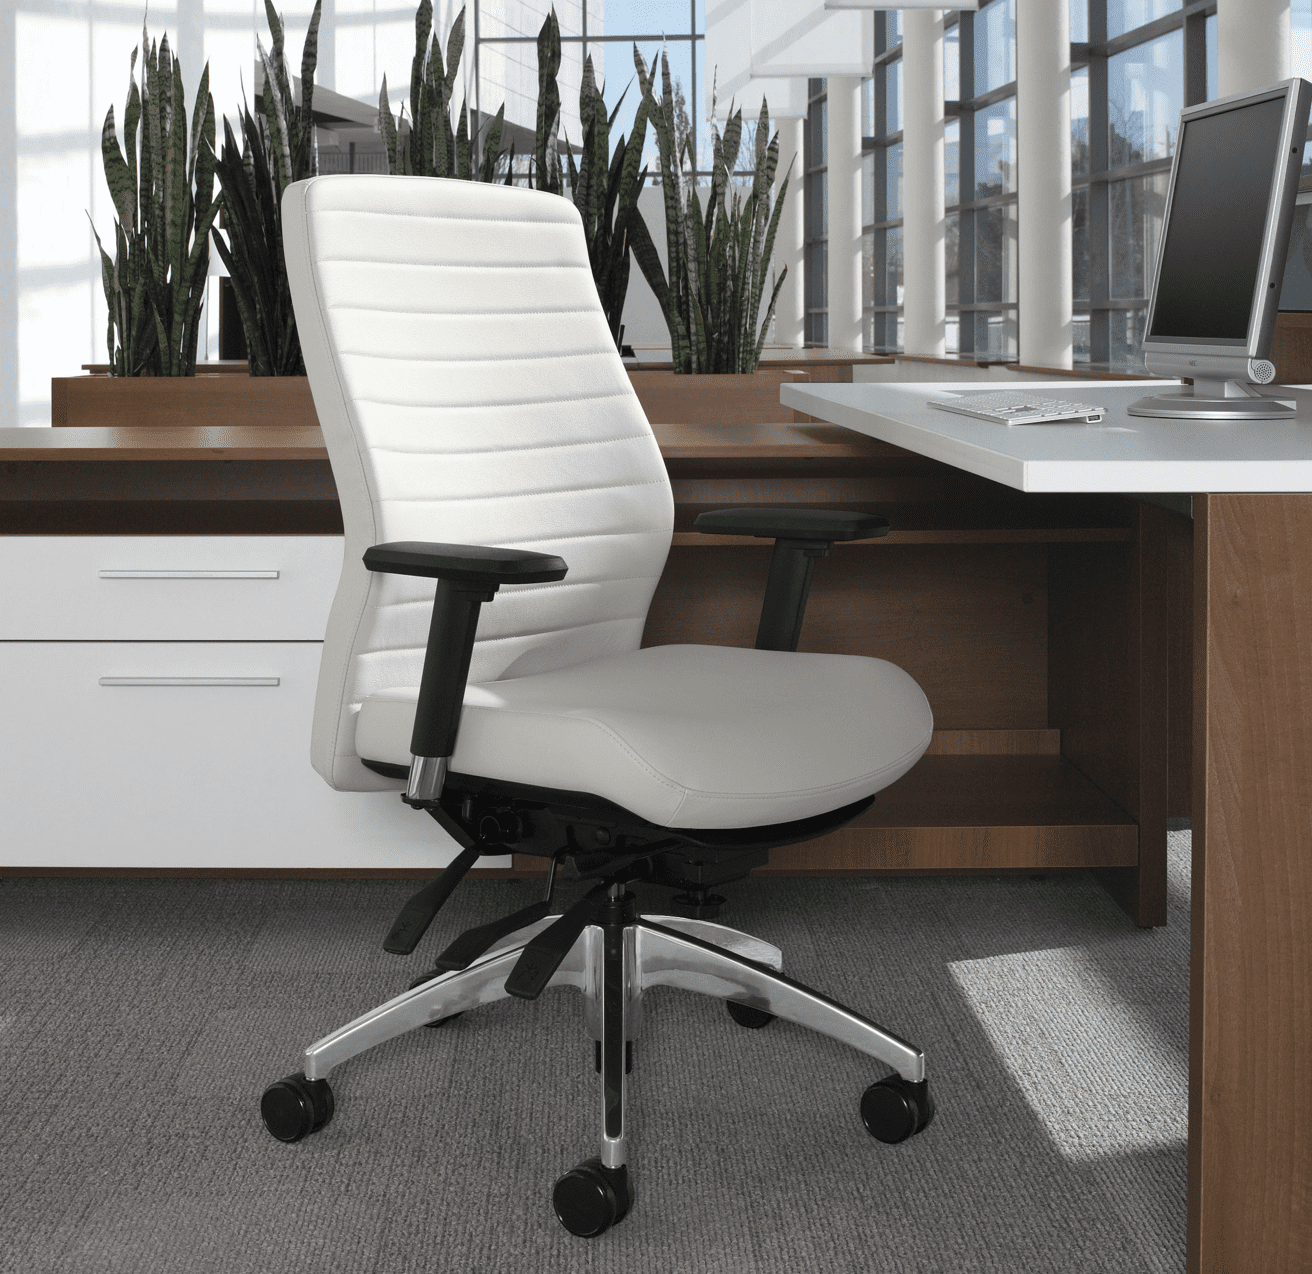 Features To Consider In Your Next Office Chair| Monarch Basics